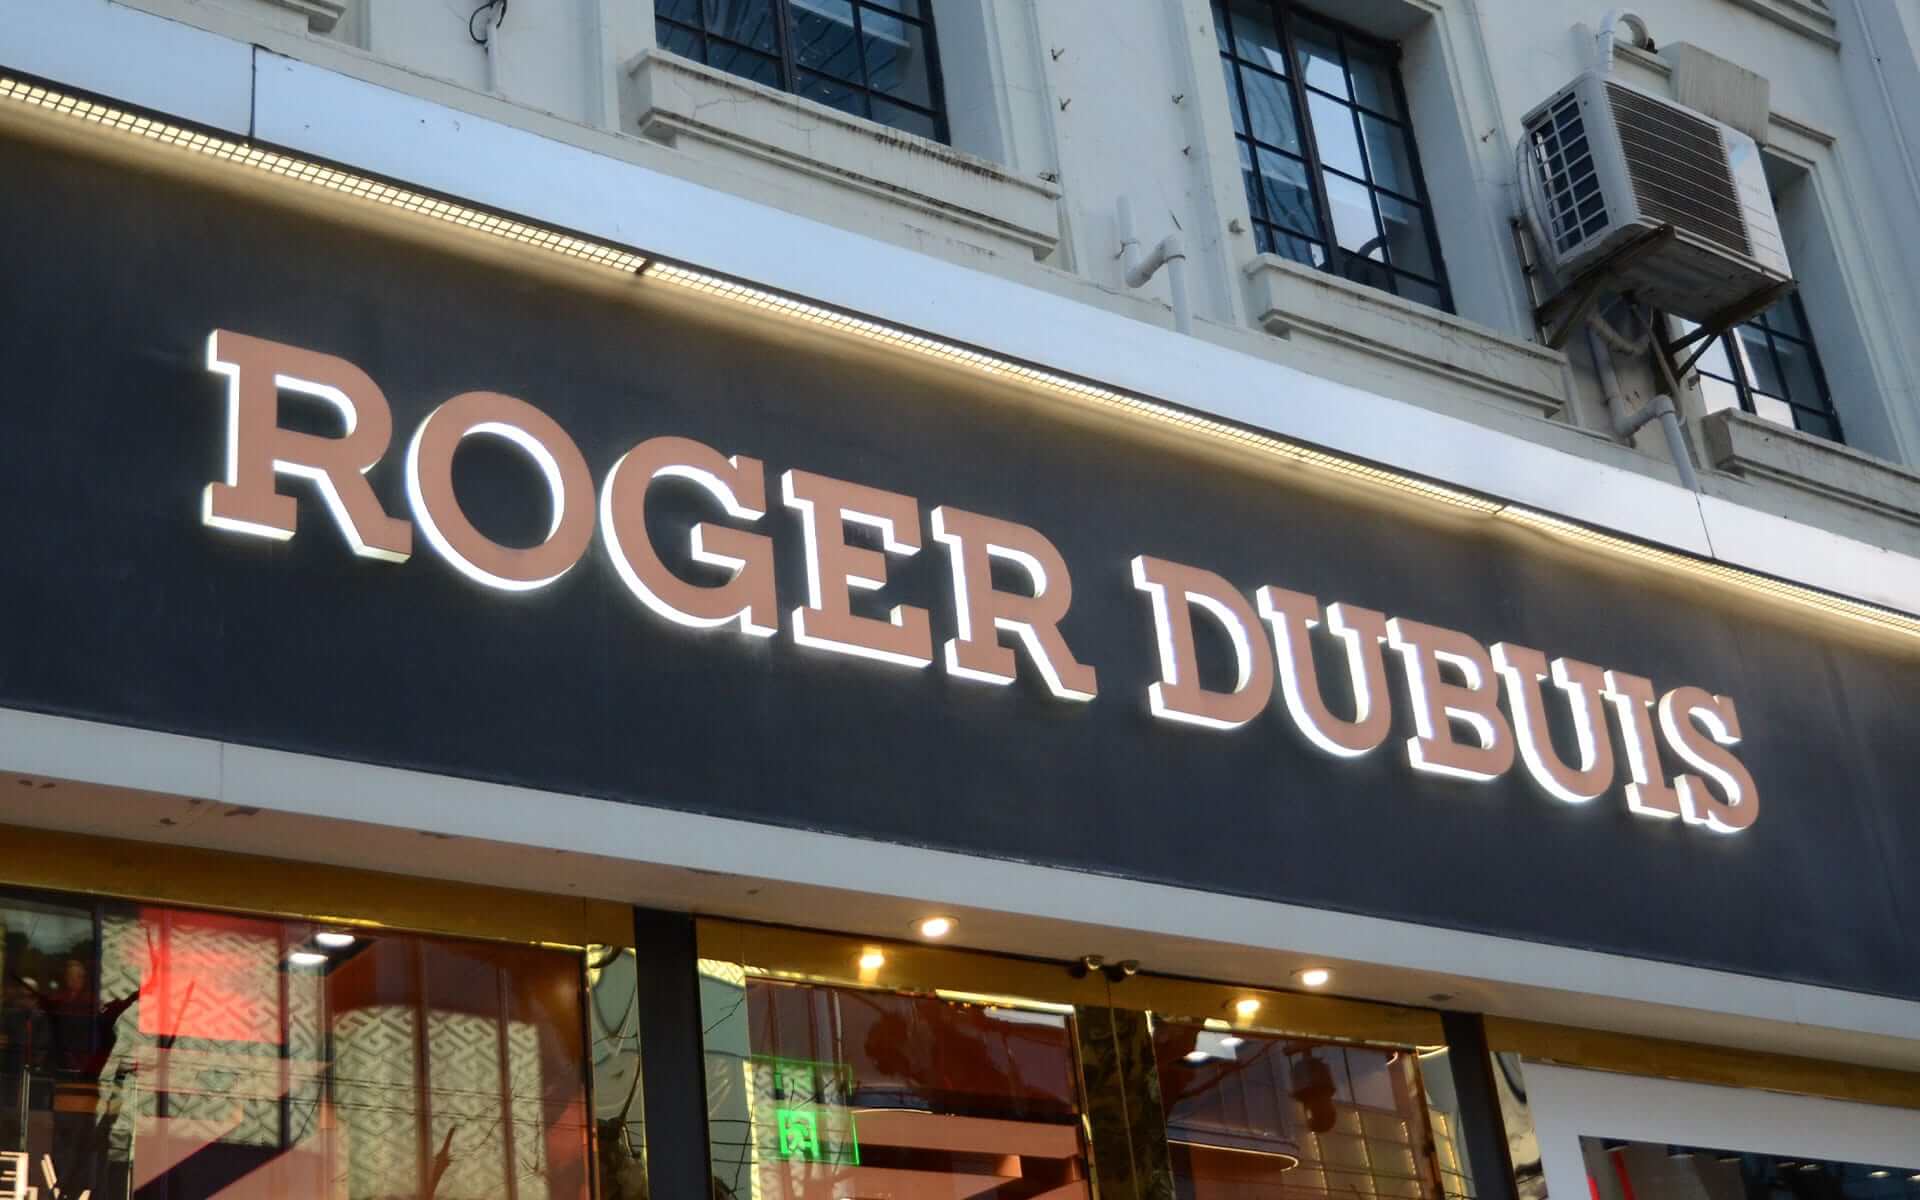 Side-lit Channel Letters for Roger Dubuis